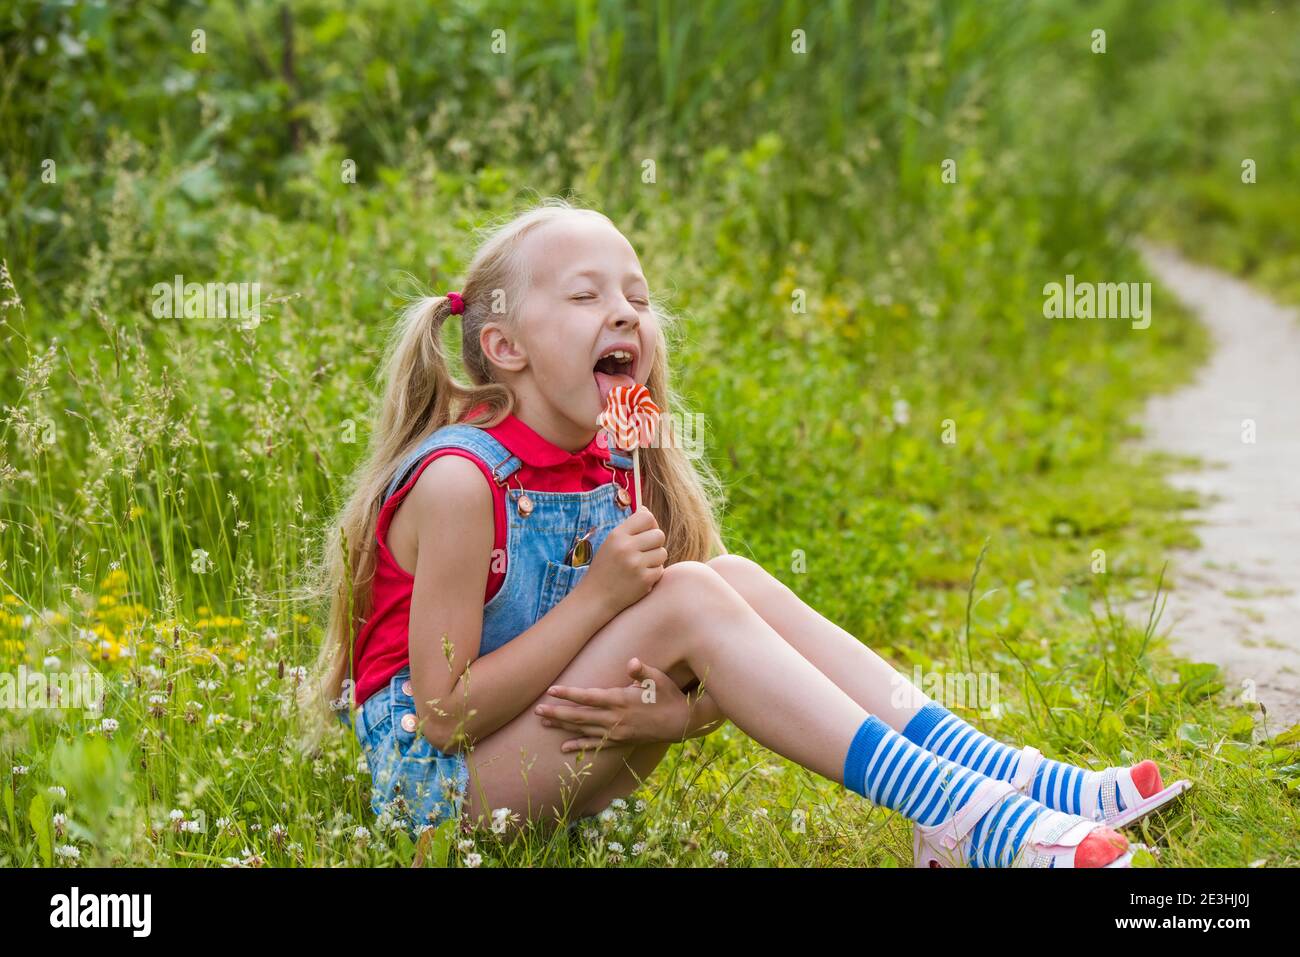 Blonde little girl with long hair and candy on a stick Stock Photo